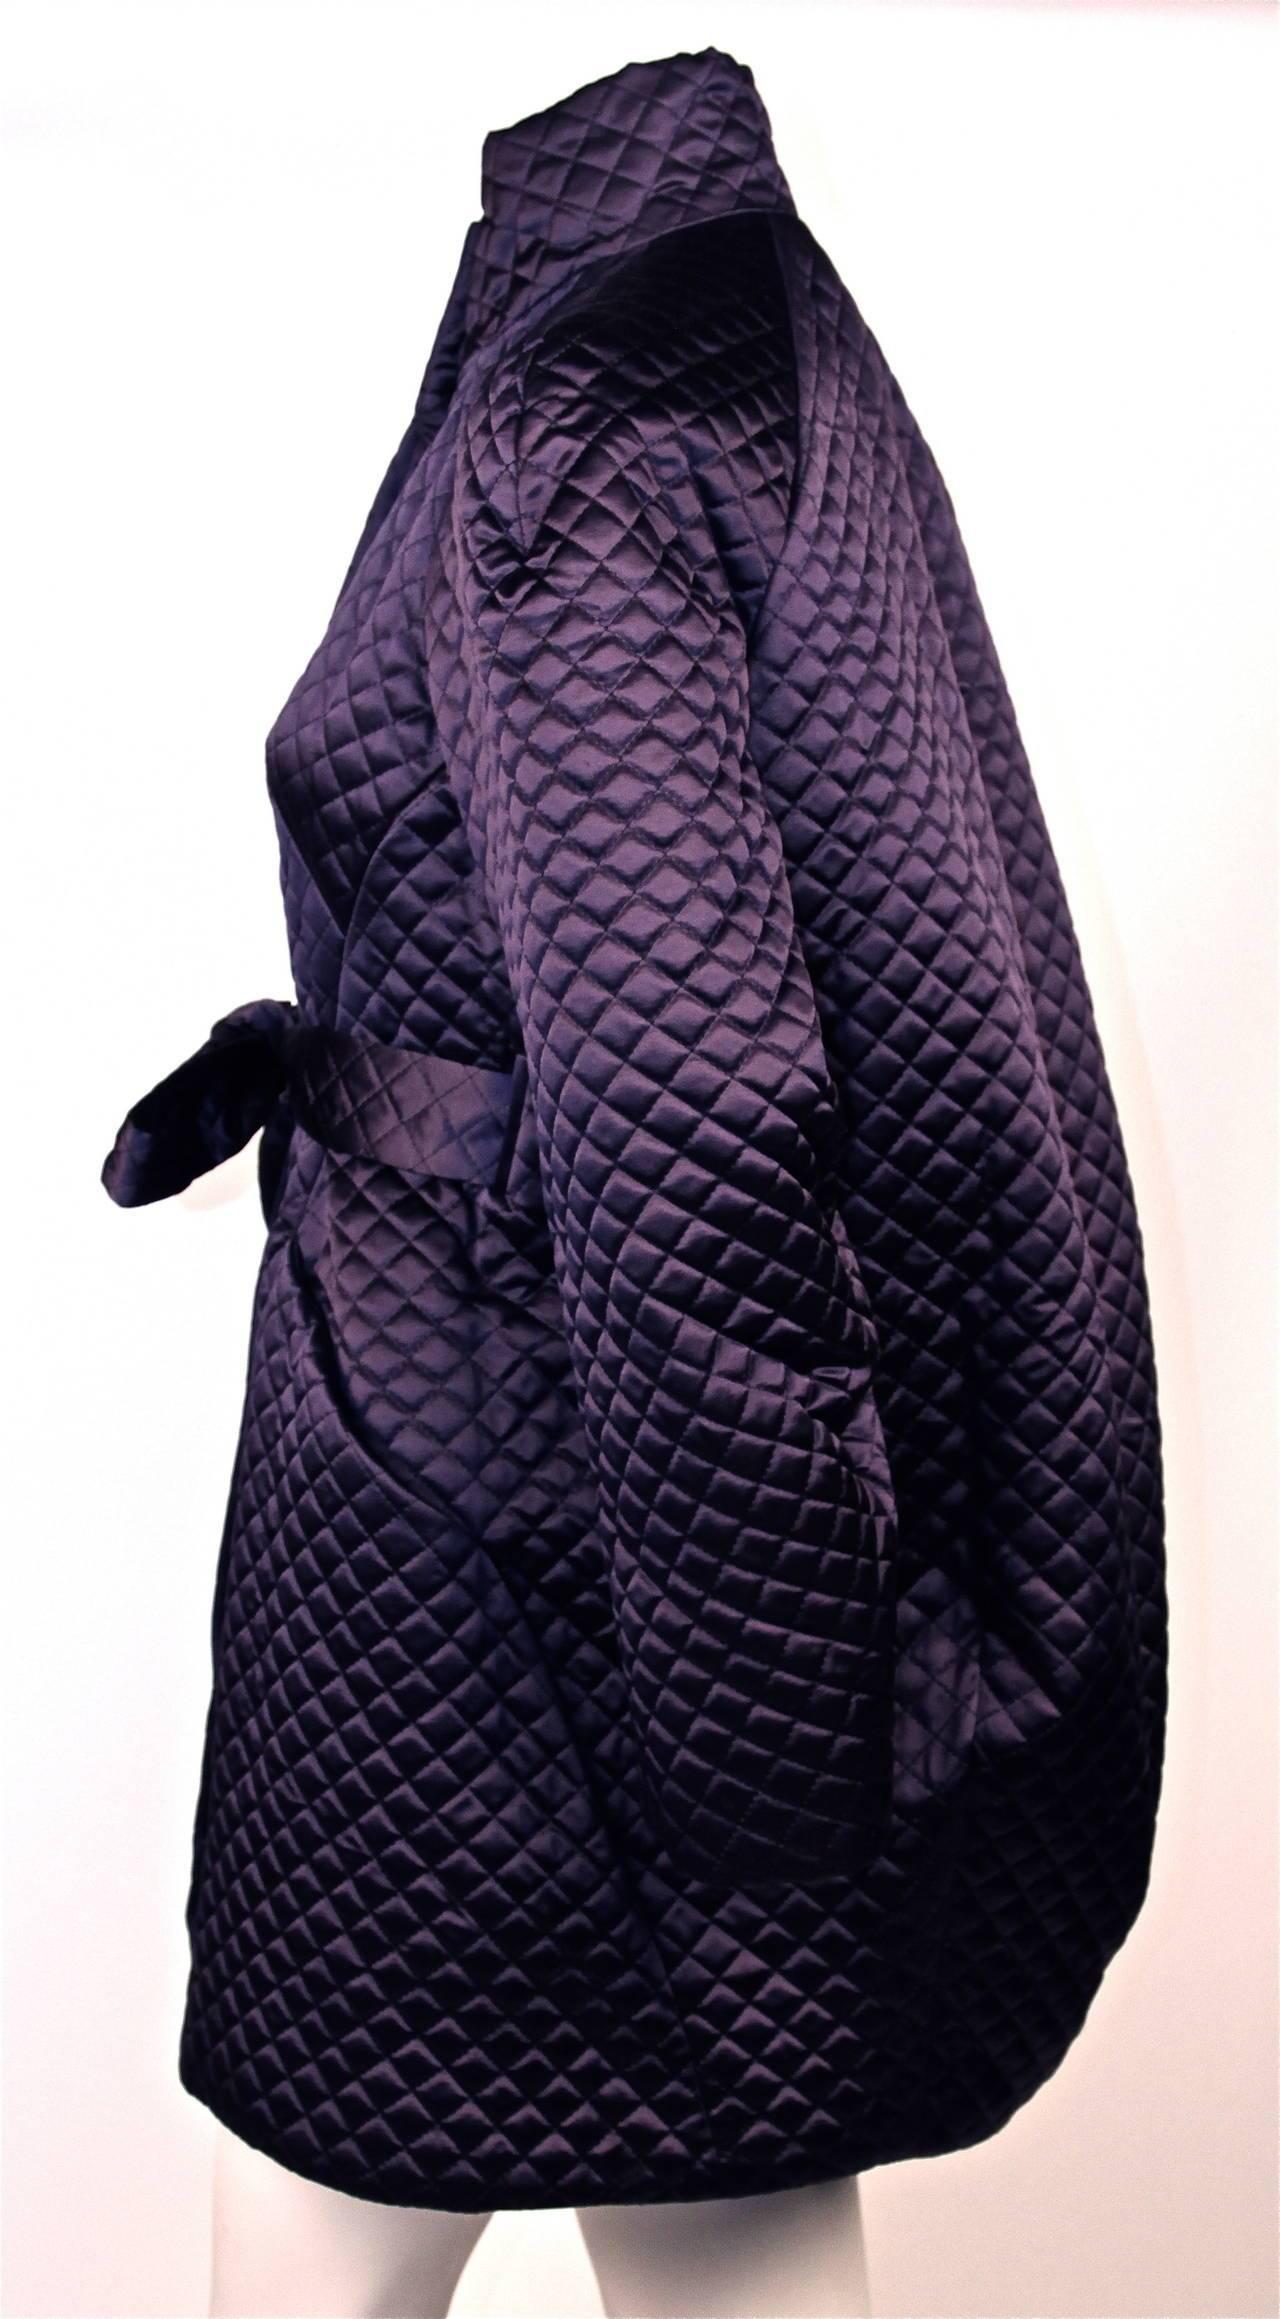 Very rare purple satin quilted cocoon coat with belt from Alexander McQueen as seen on the runway for fall of 2007. Labeled a size 42 however this coat is meant to fit oversized and can be adjusted at the waist with the belt. It best fits a US 4-8.